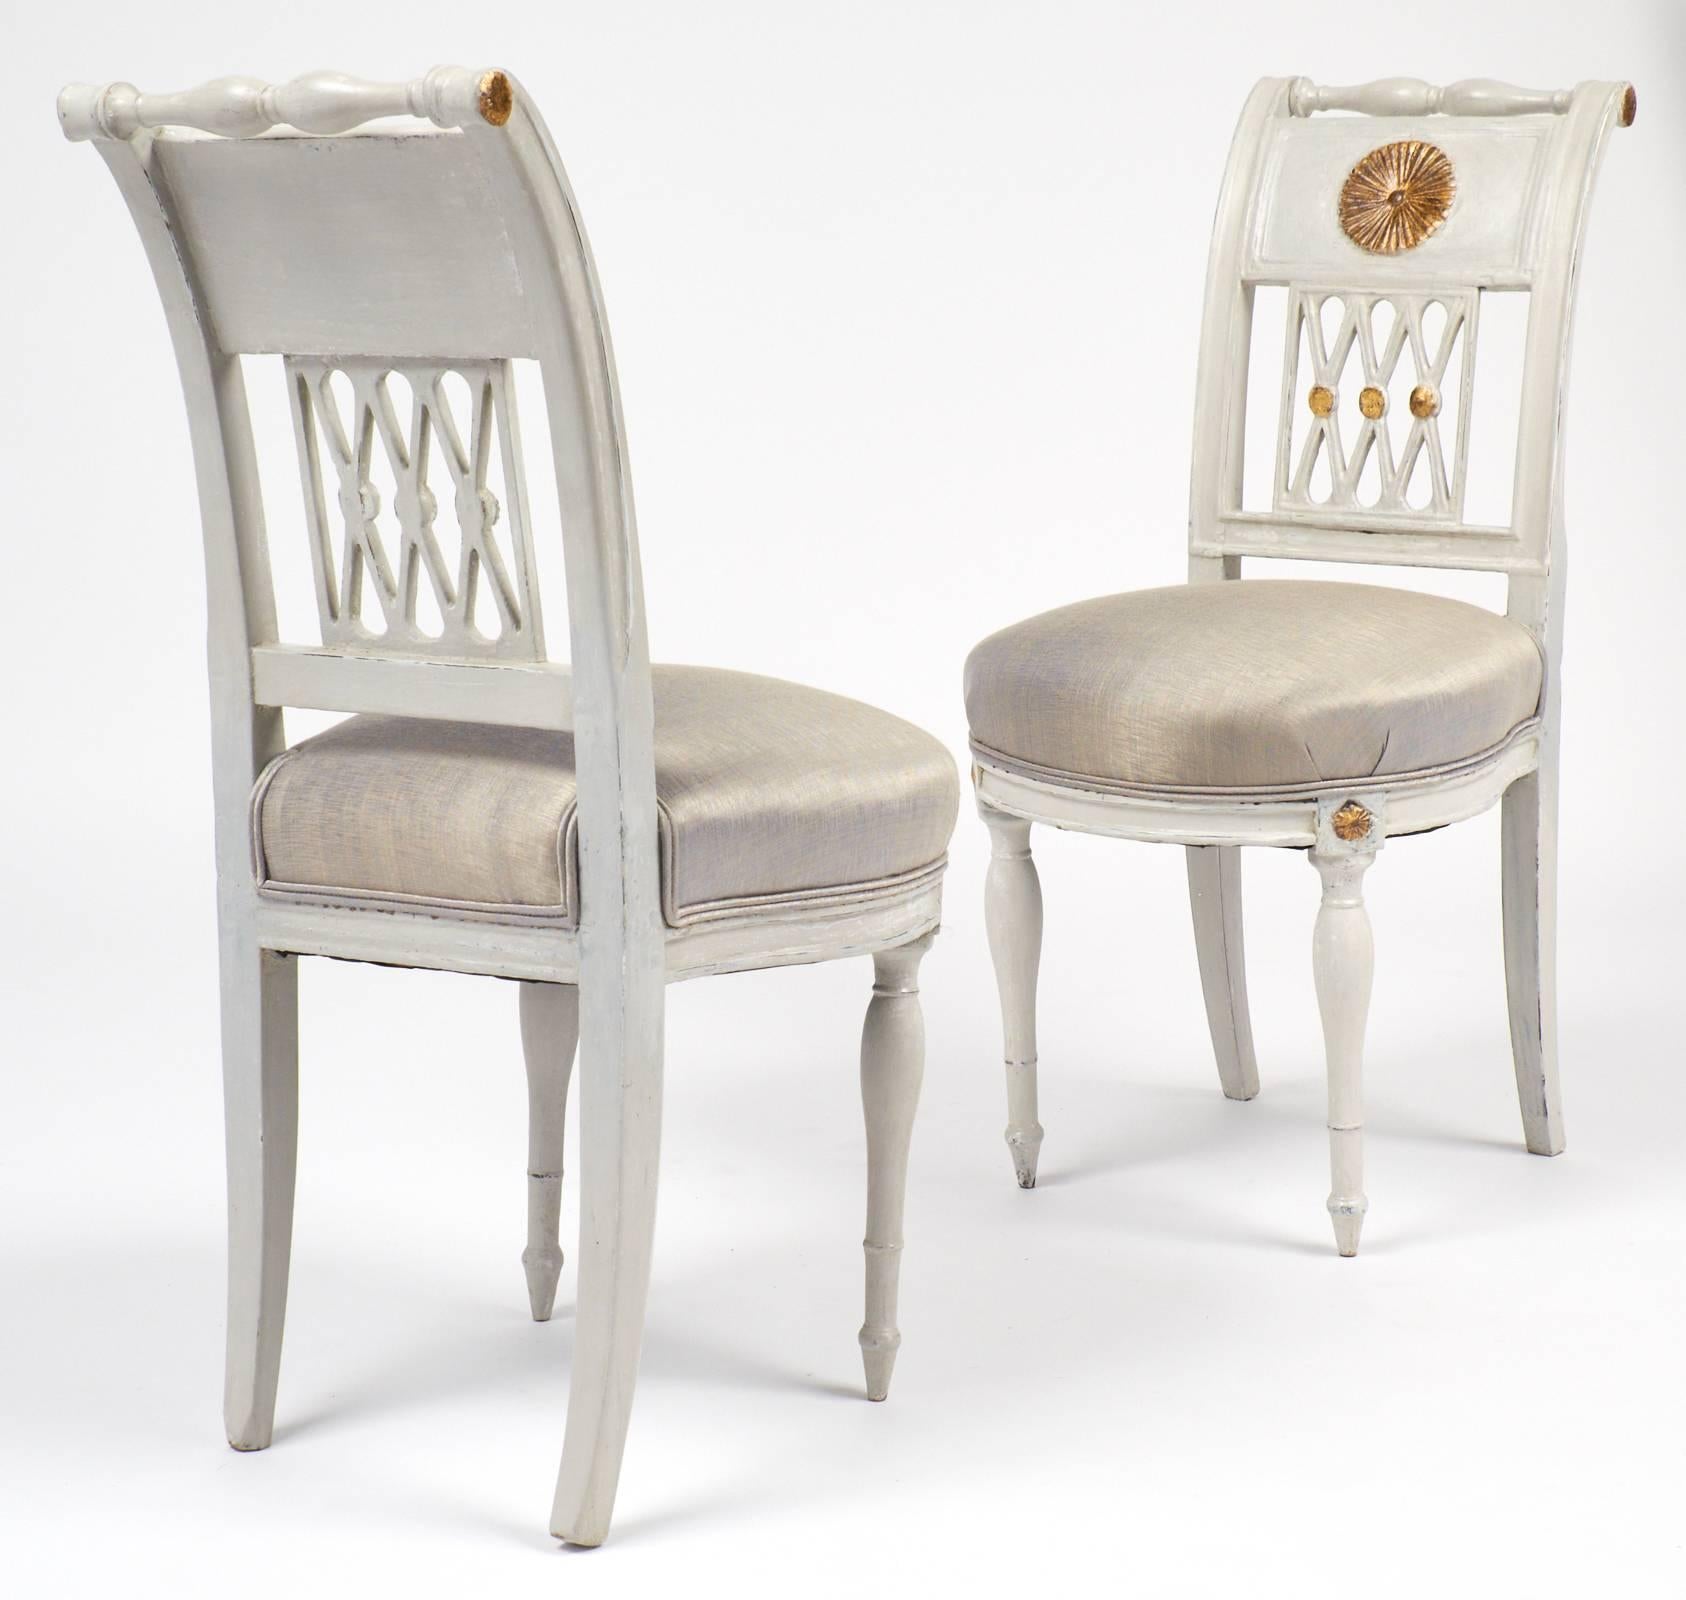 Early 19th Century French Directoire Period Pair of Side Chairs